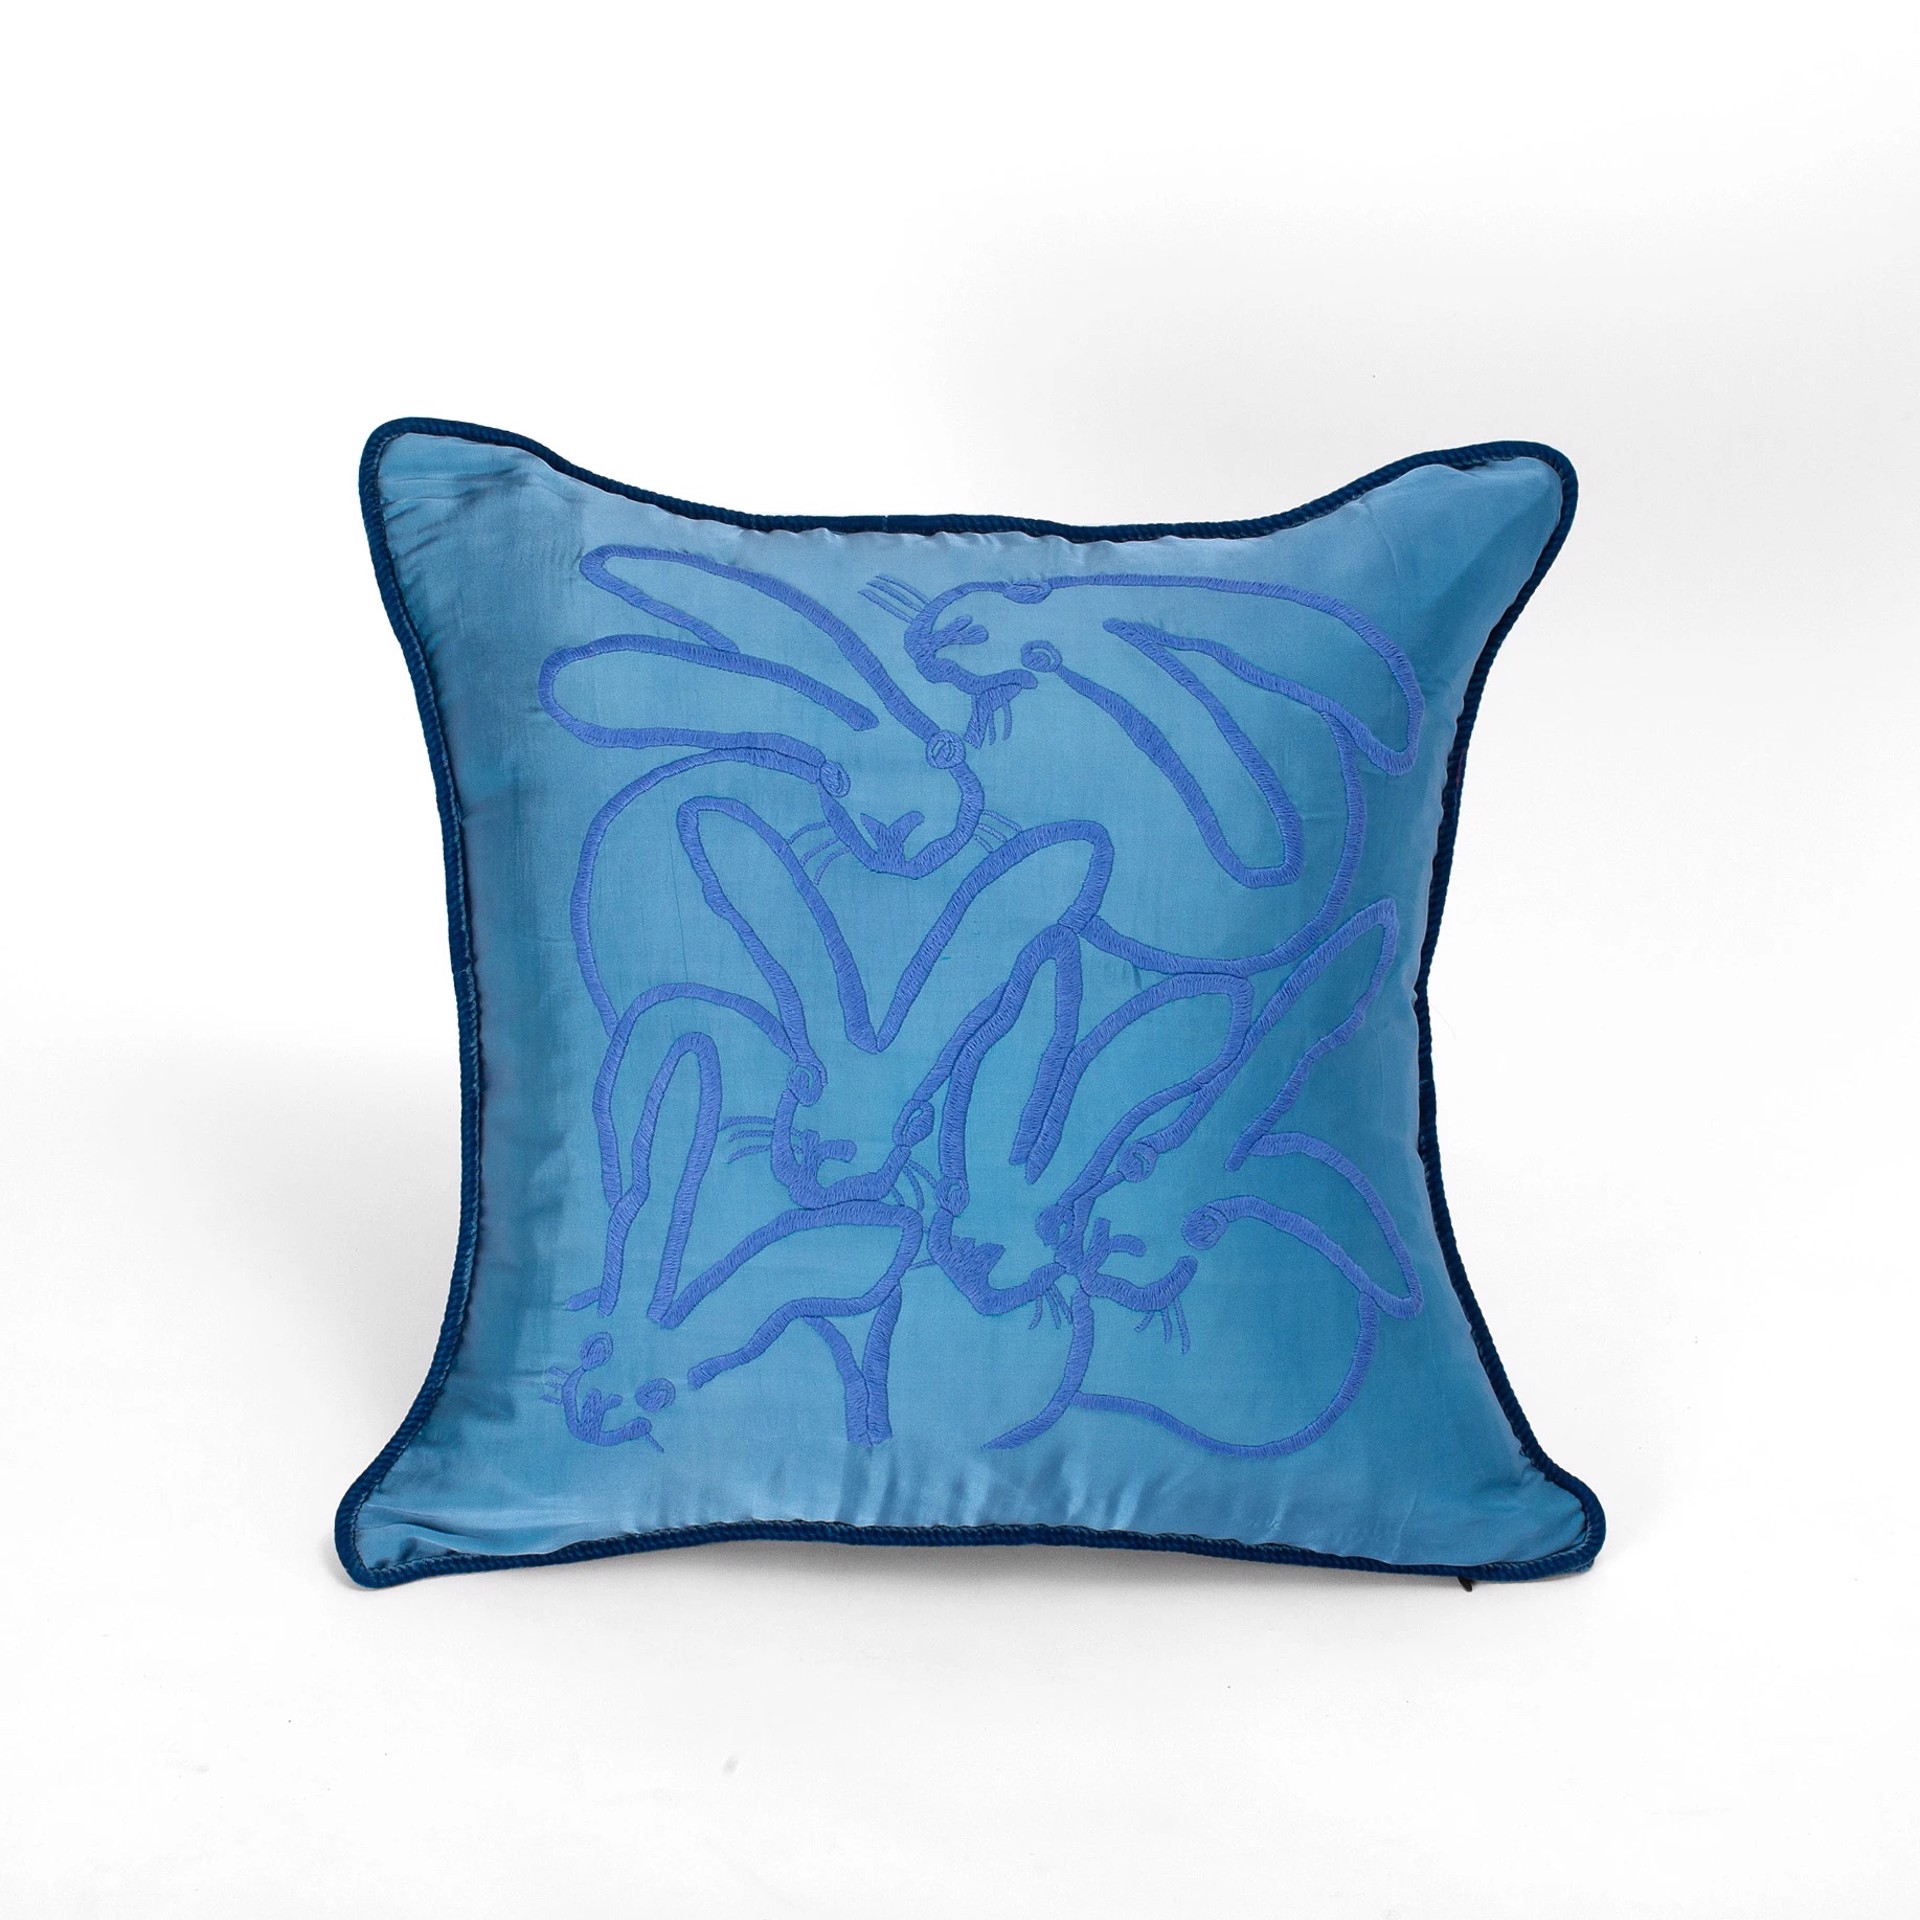 Hand Embroidered Silk and Velvet Pillow - French Blue by Hunt Slonem (Hop Up Shop)